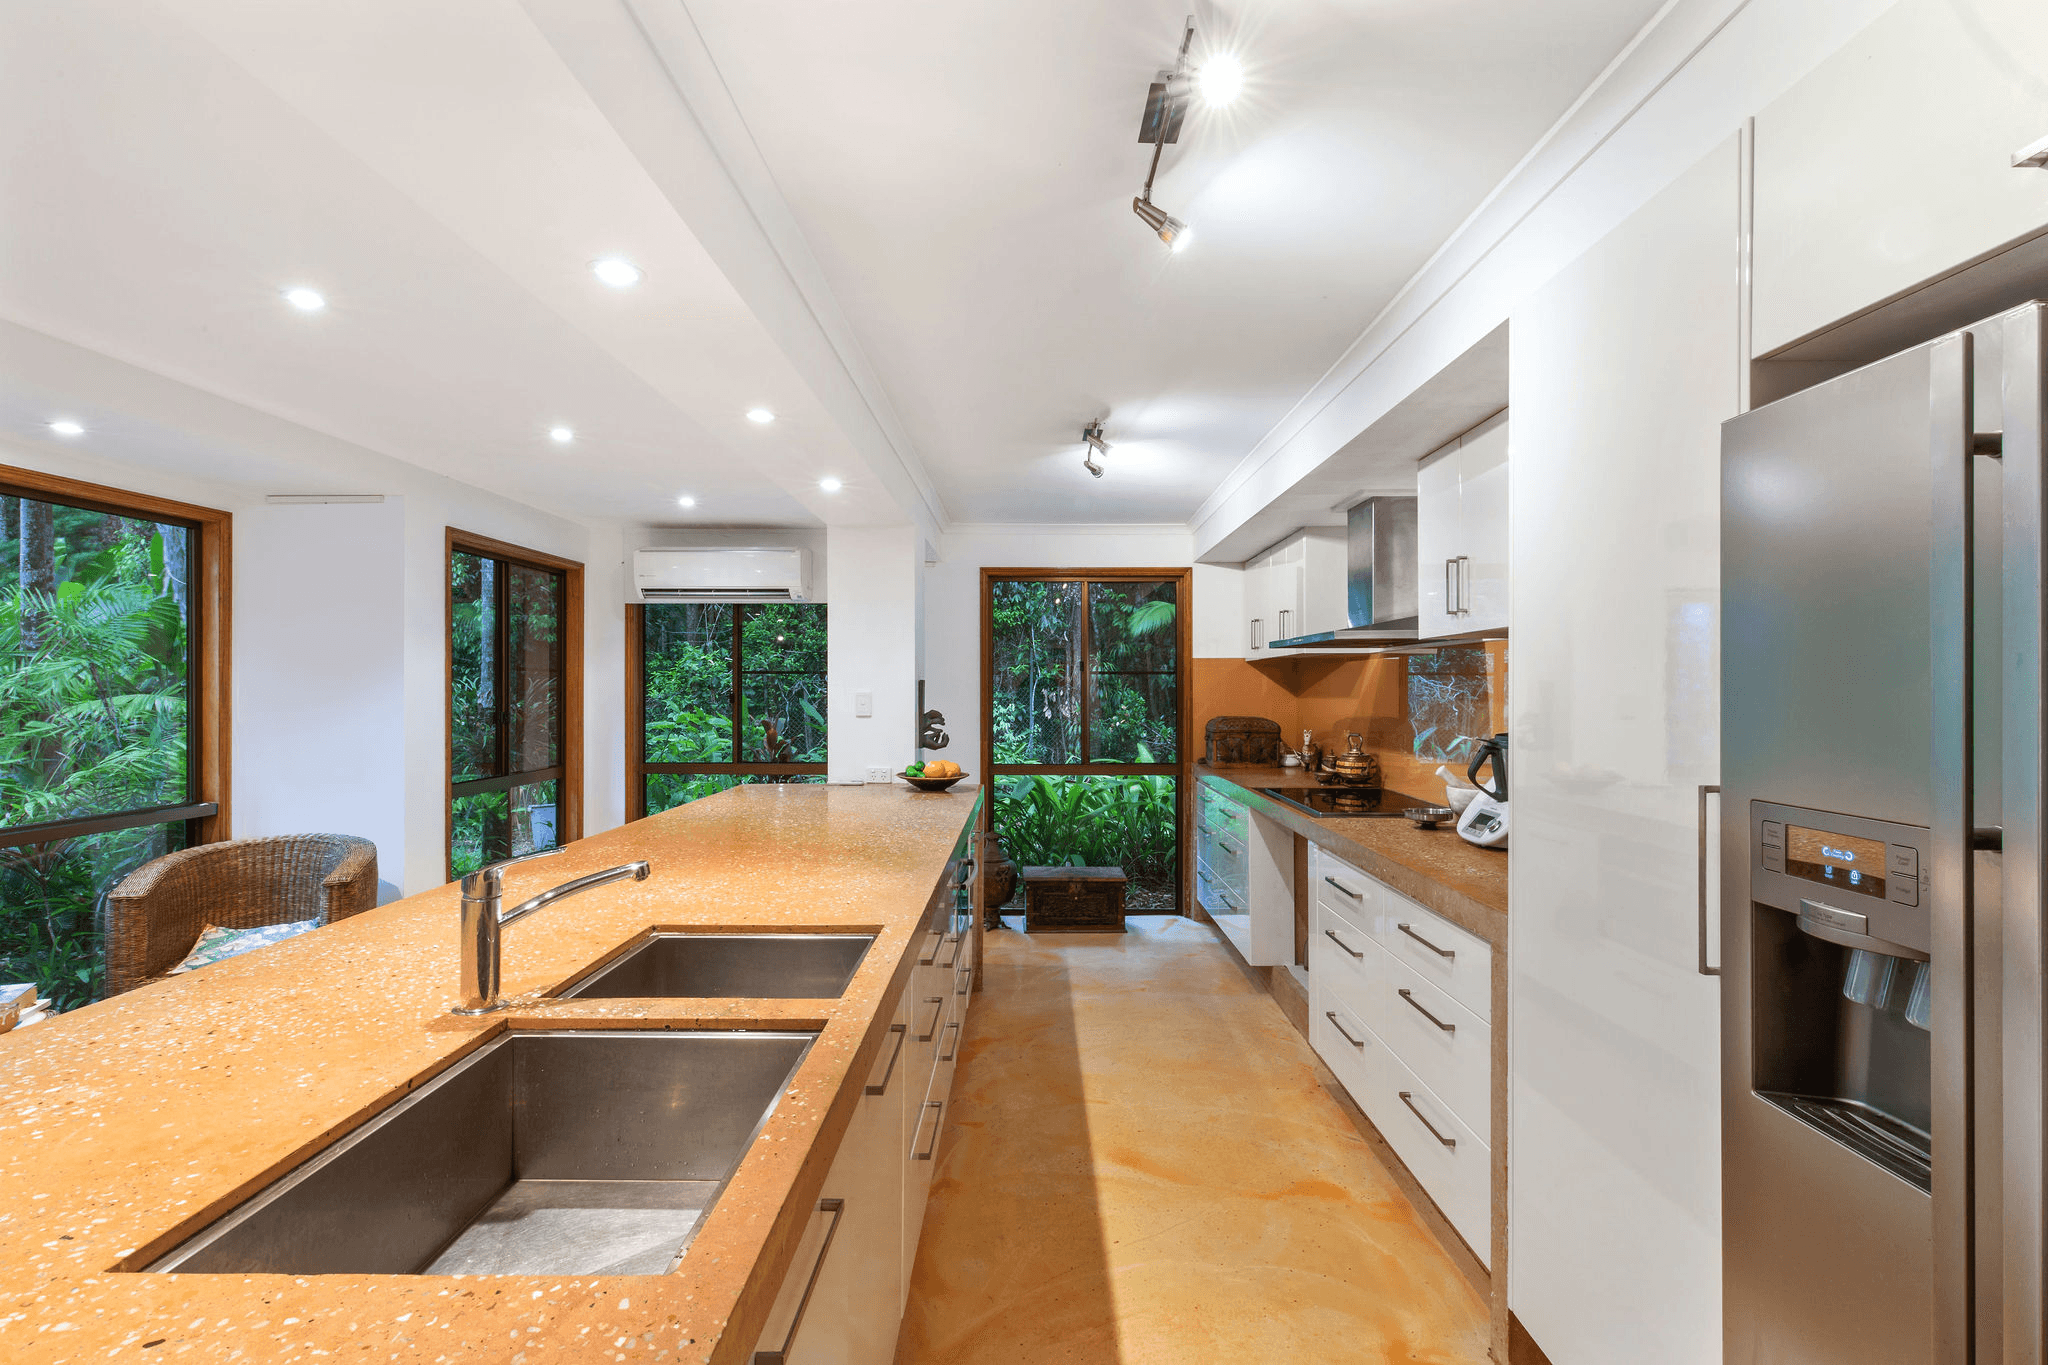 41 Anning Road, FOREST GLEN, QLD 4556